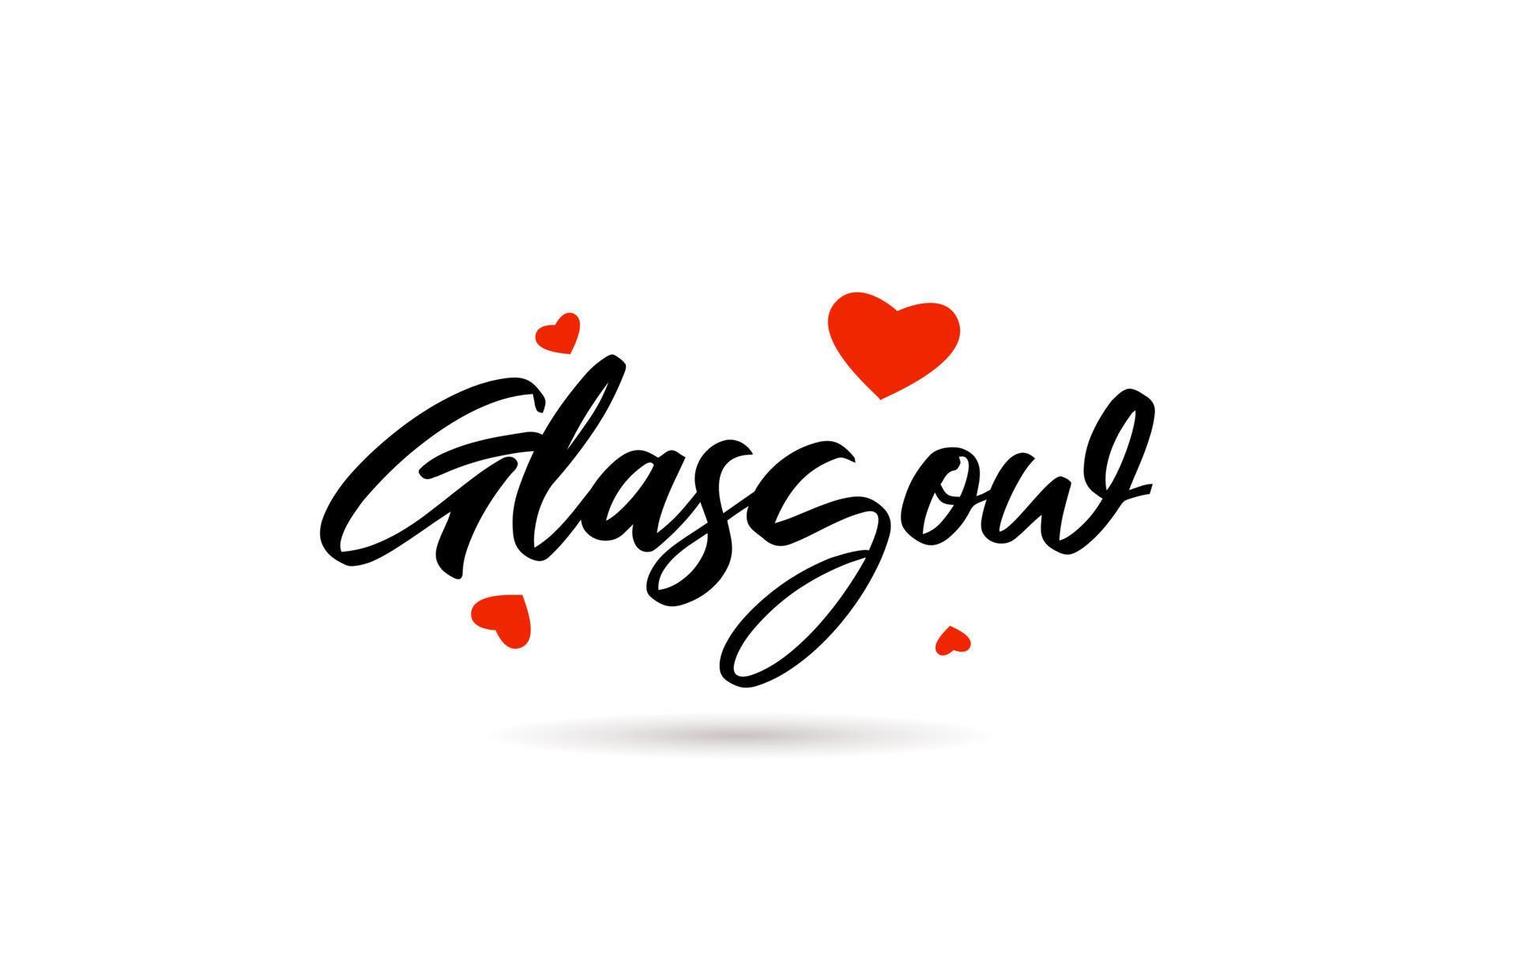 Glasgow handwritten city typography text with love heart vector